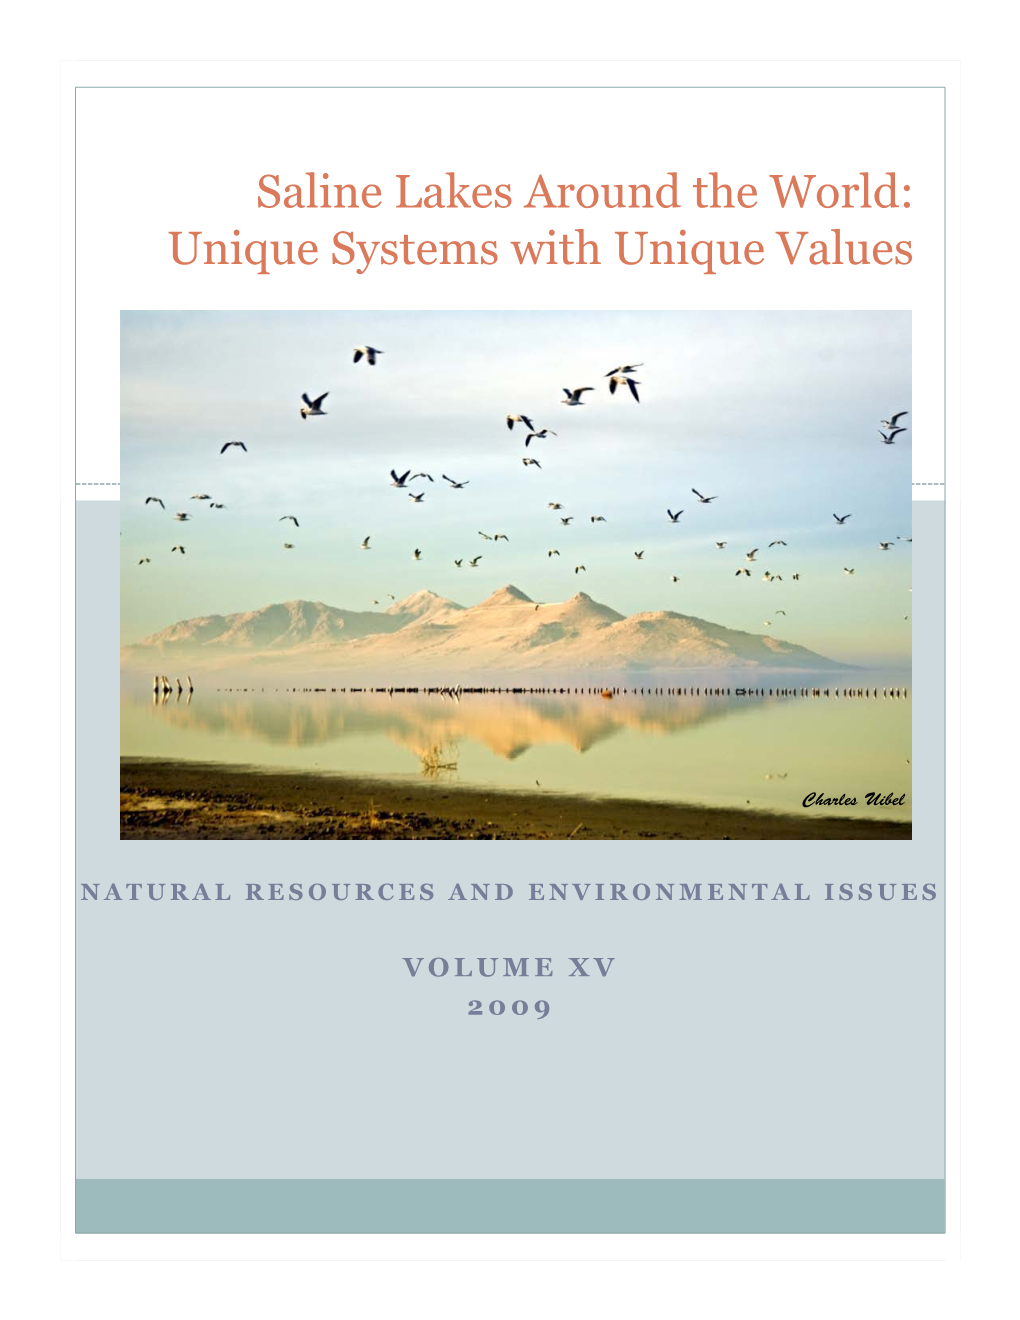 Saline Lakes Around the World: Unique Systems with Unique Values